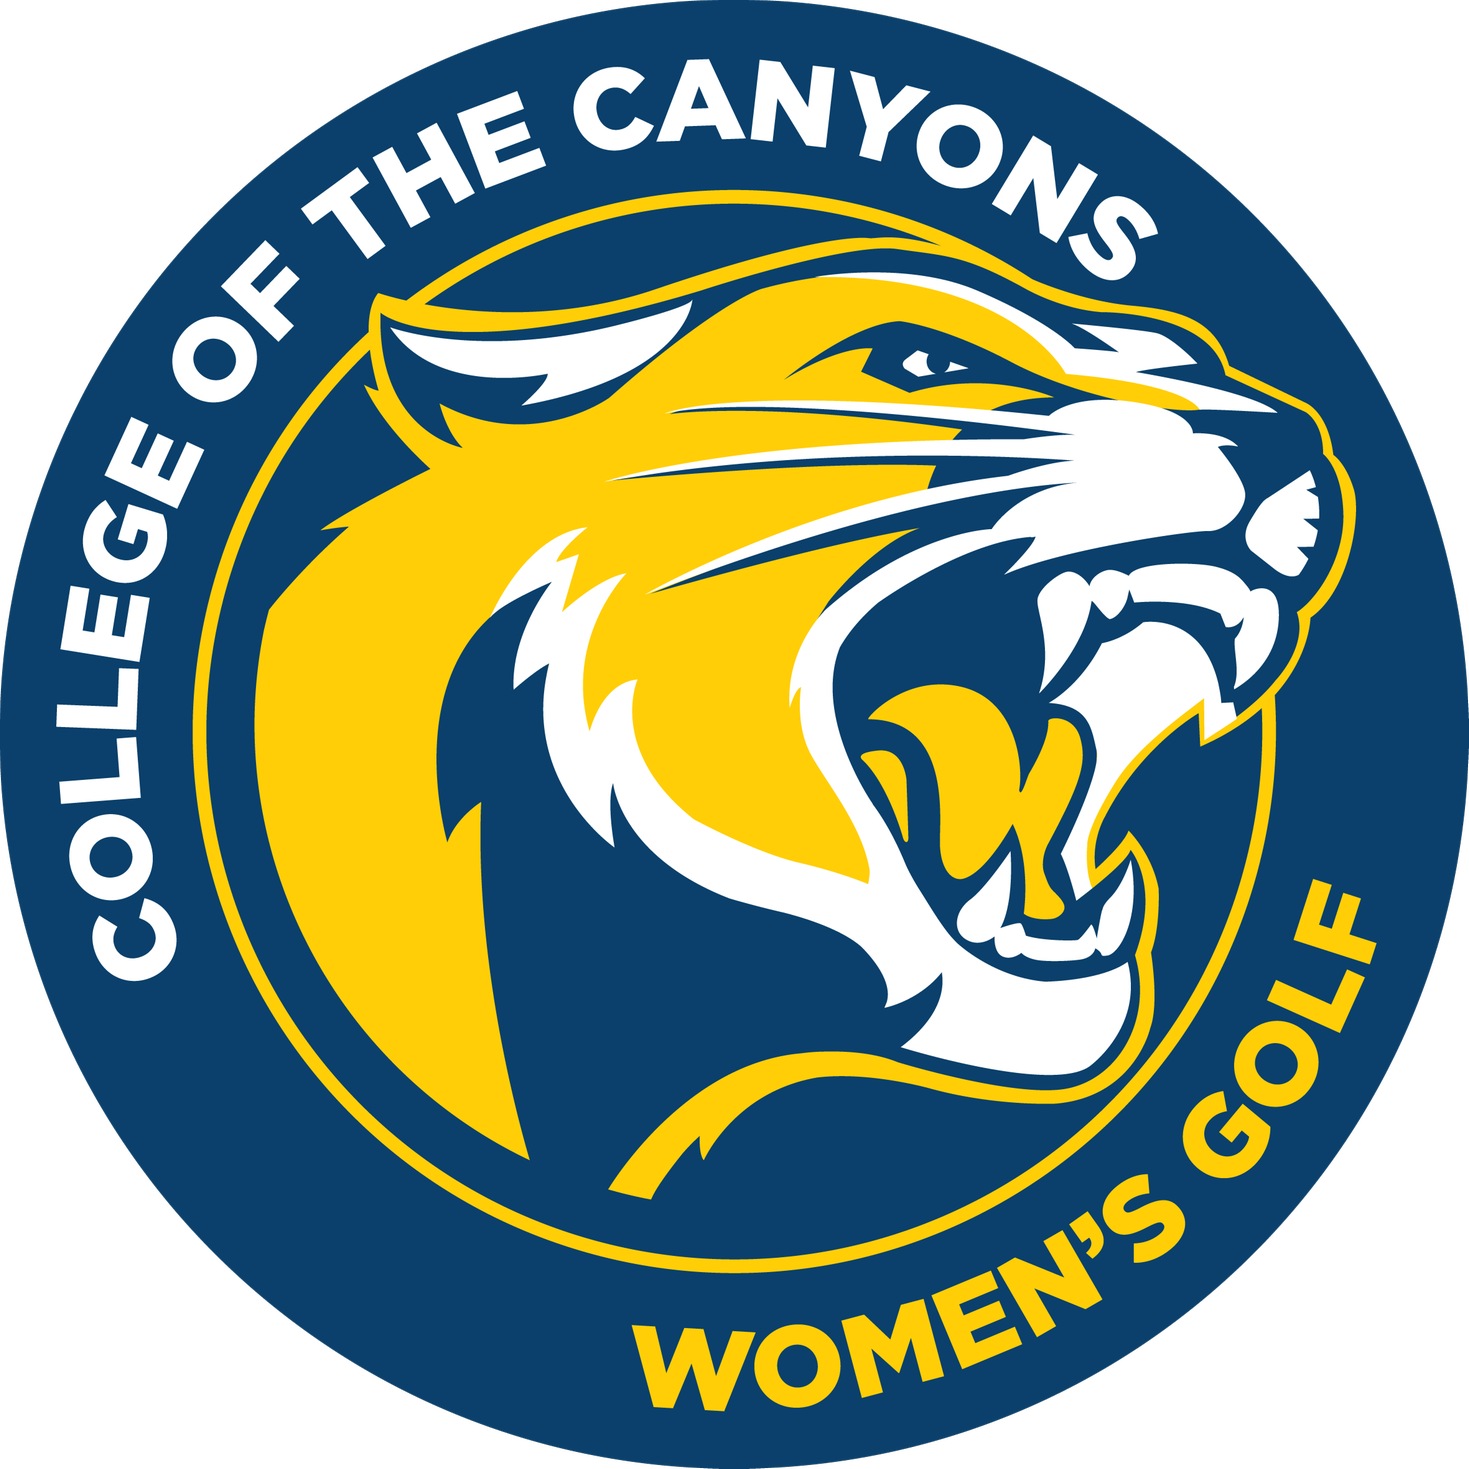 College of the Canyons women's golf logo.